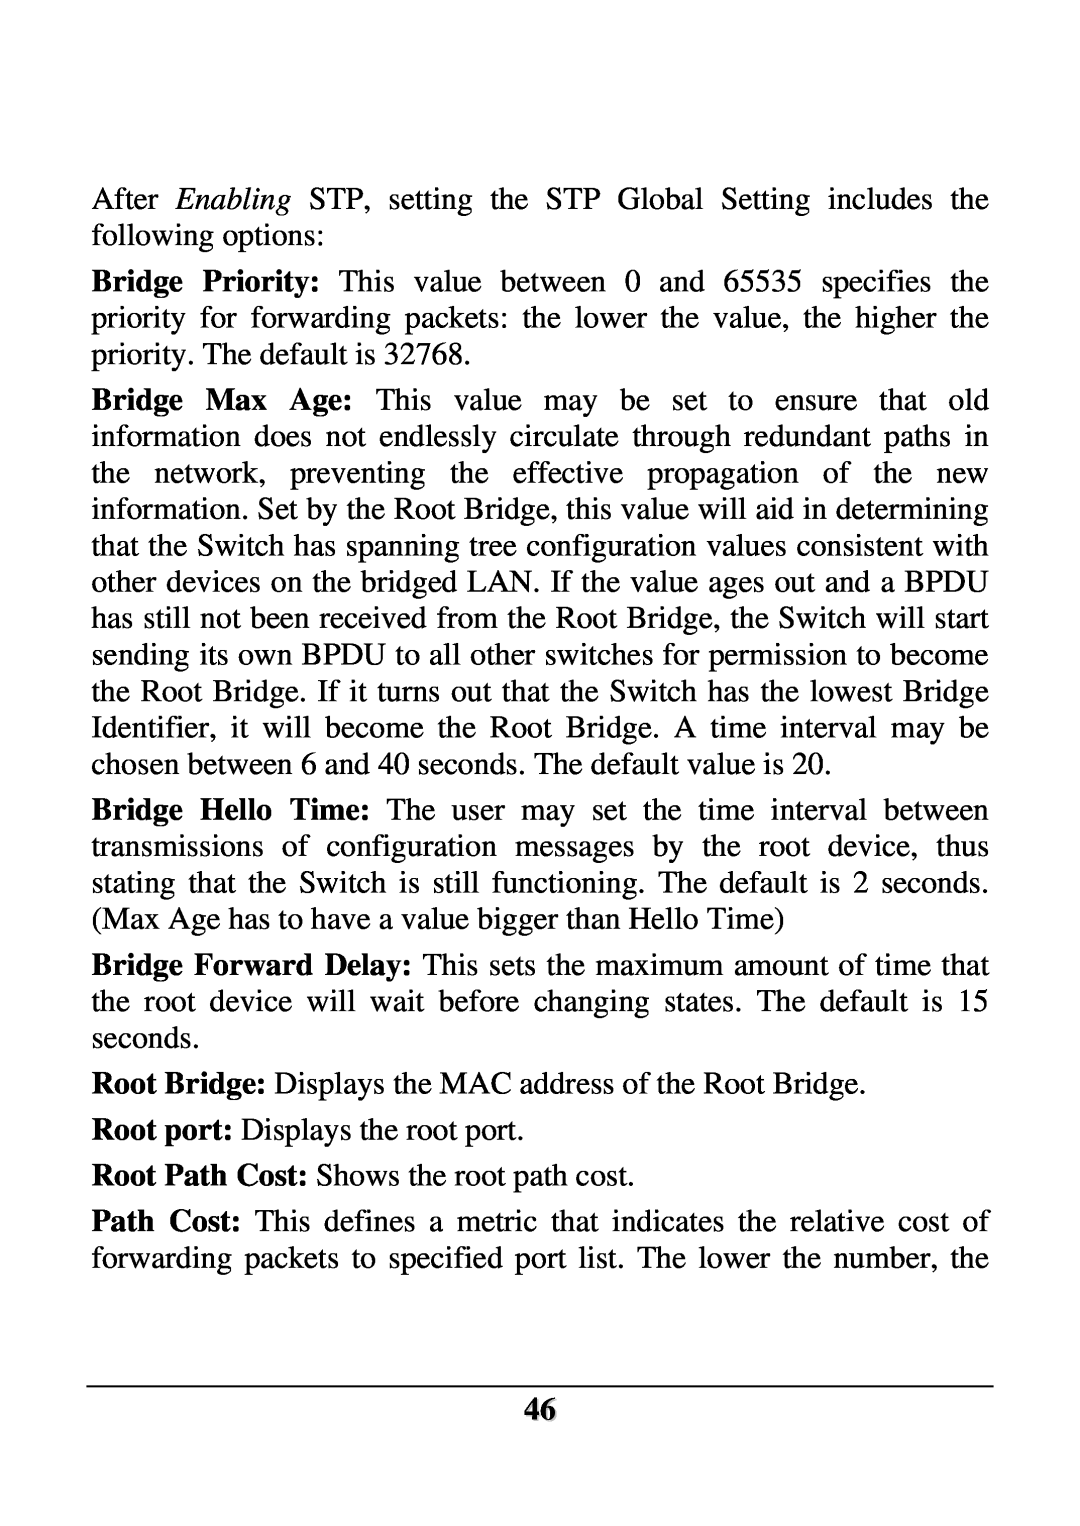 D-Link DES-1228 user manual Bridge Priority This value between 0 and 65535 specifies the, Root port Displays the root port 